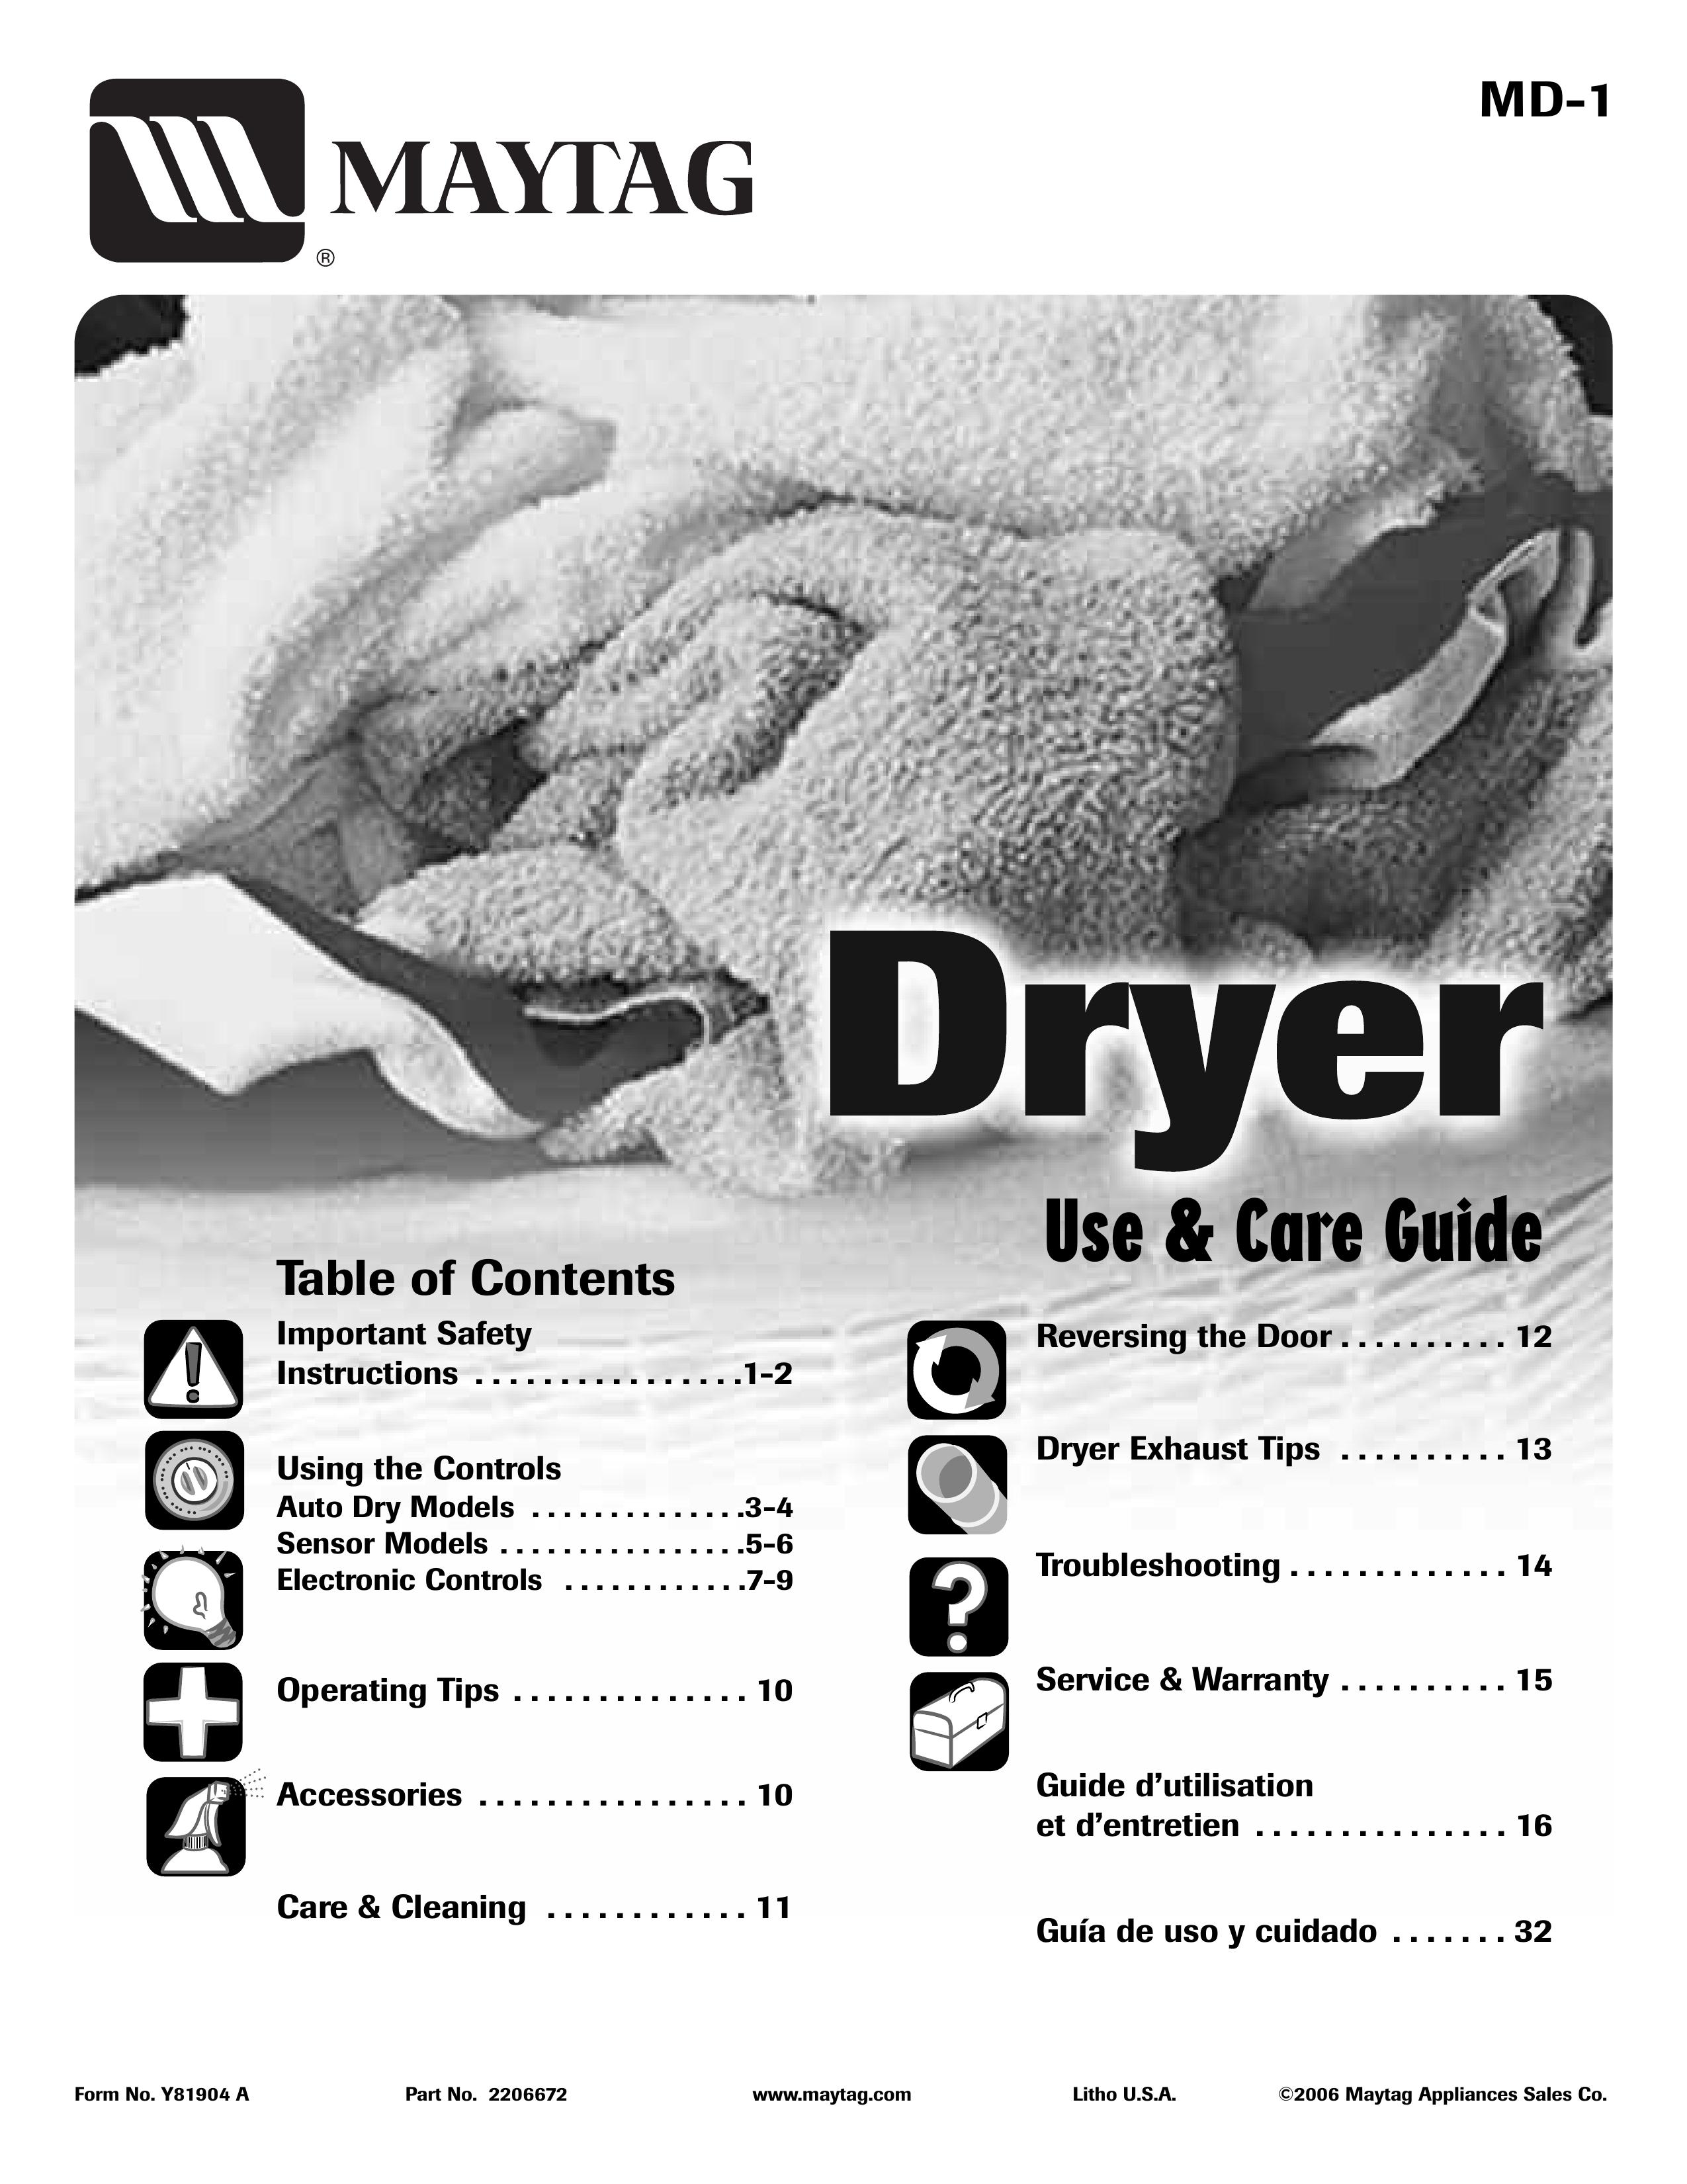 Maytag MD-1 Clothes Dryer User Manual